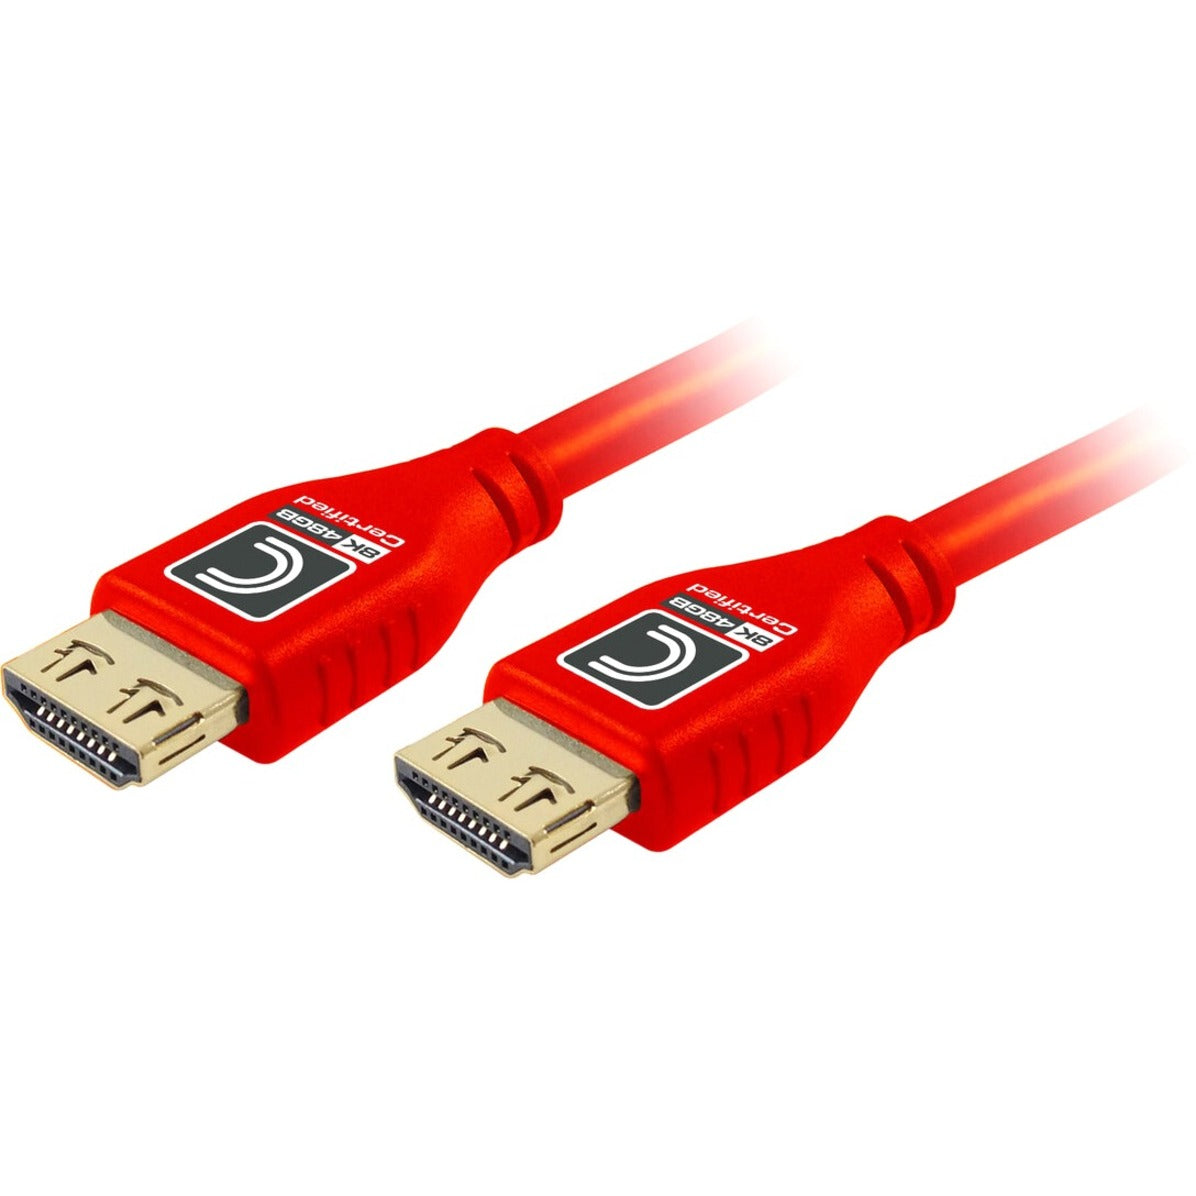 Comprehensive MHD48G-6PRORED MicroFlex Pro AV/IT HDMI A/V Cable, 6 ft, 48 Gbit/s Data Transfer Rate, Red